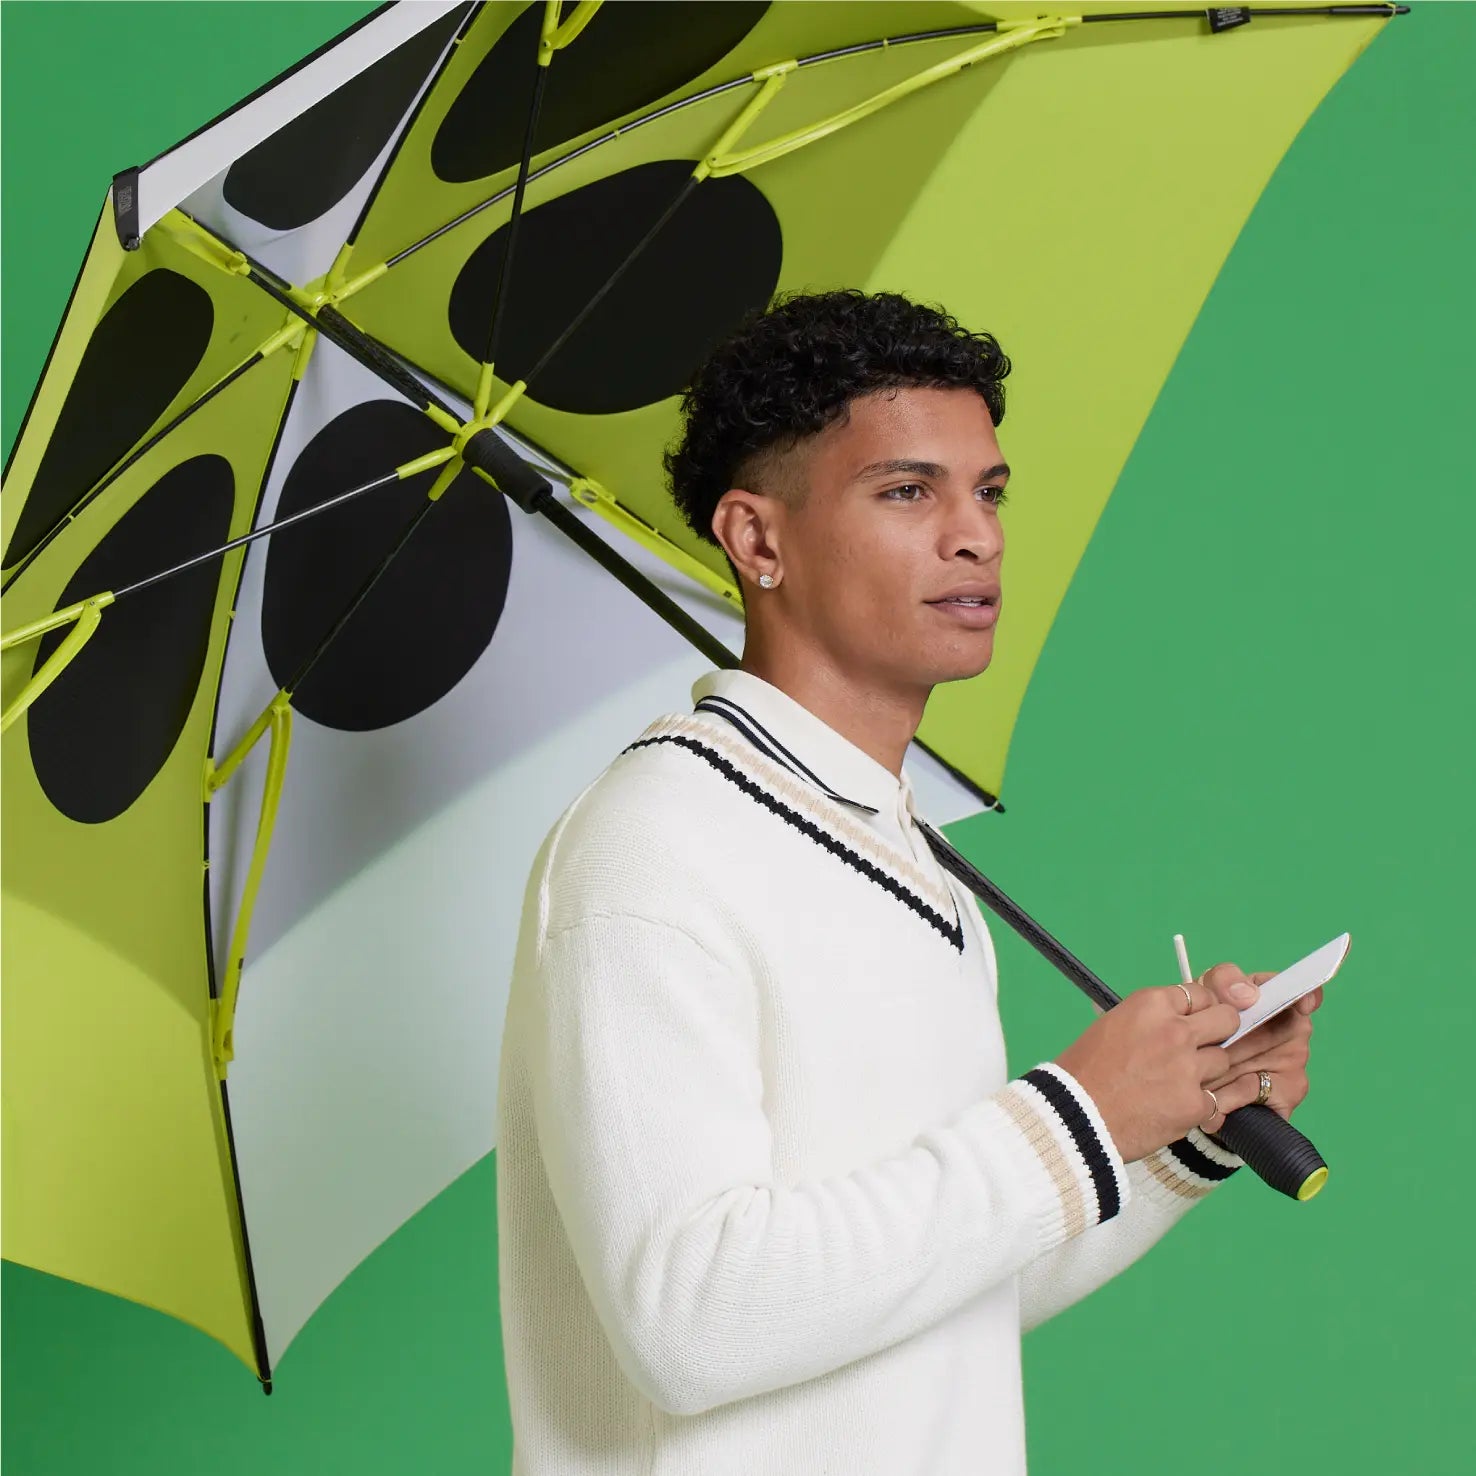 VORTEX UMBRELLAS KEEP YOU ON COURSE OUT ON THE COURSE